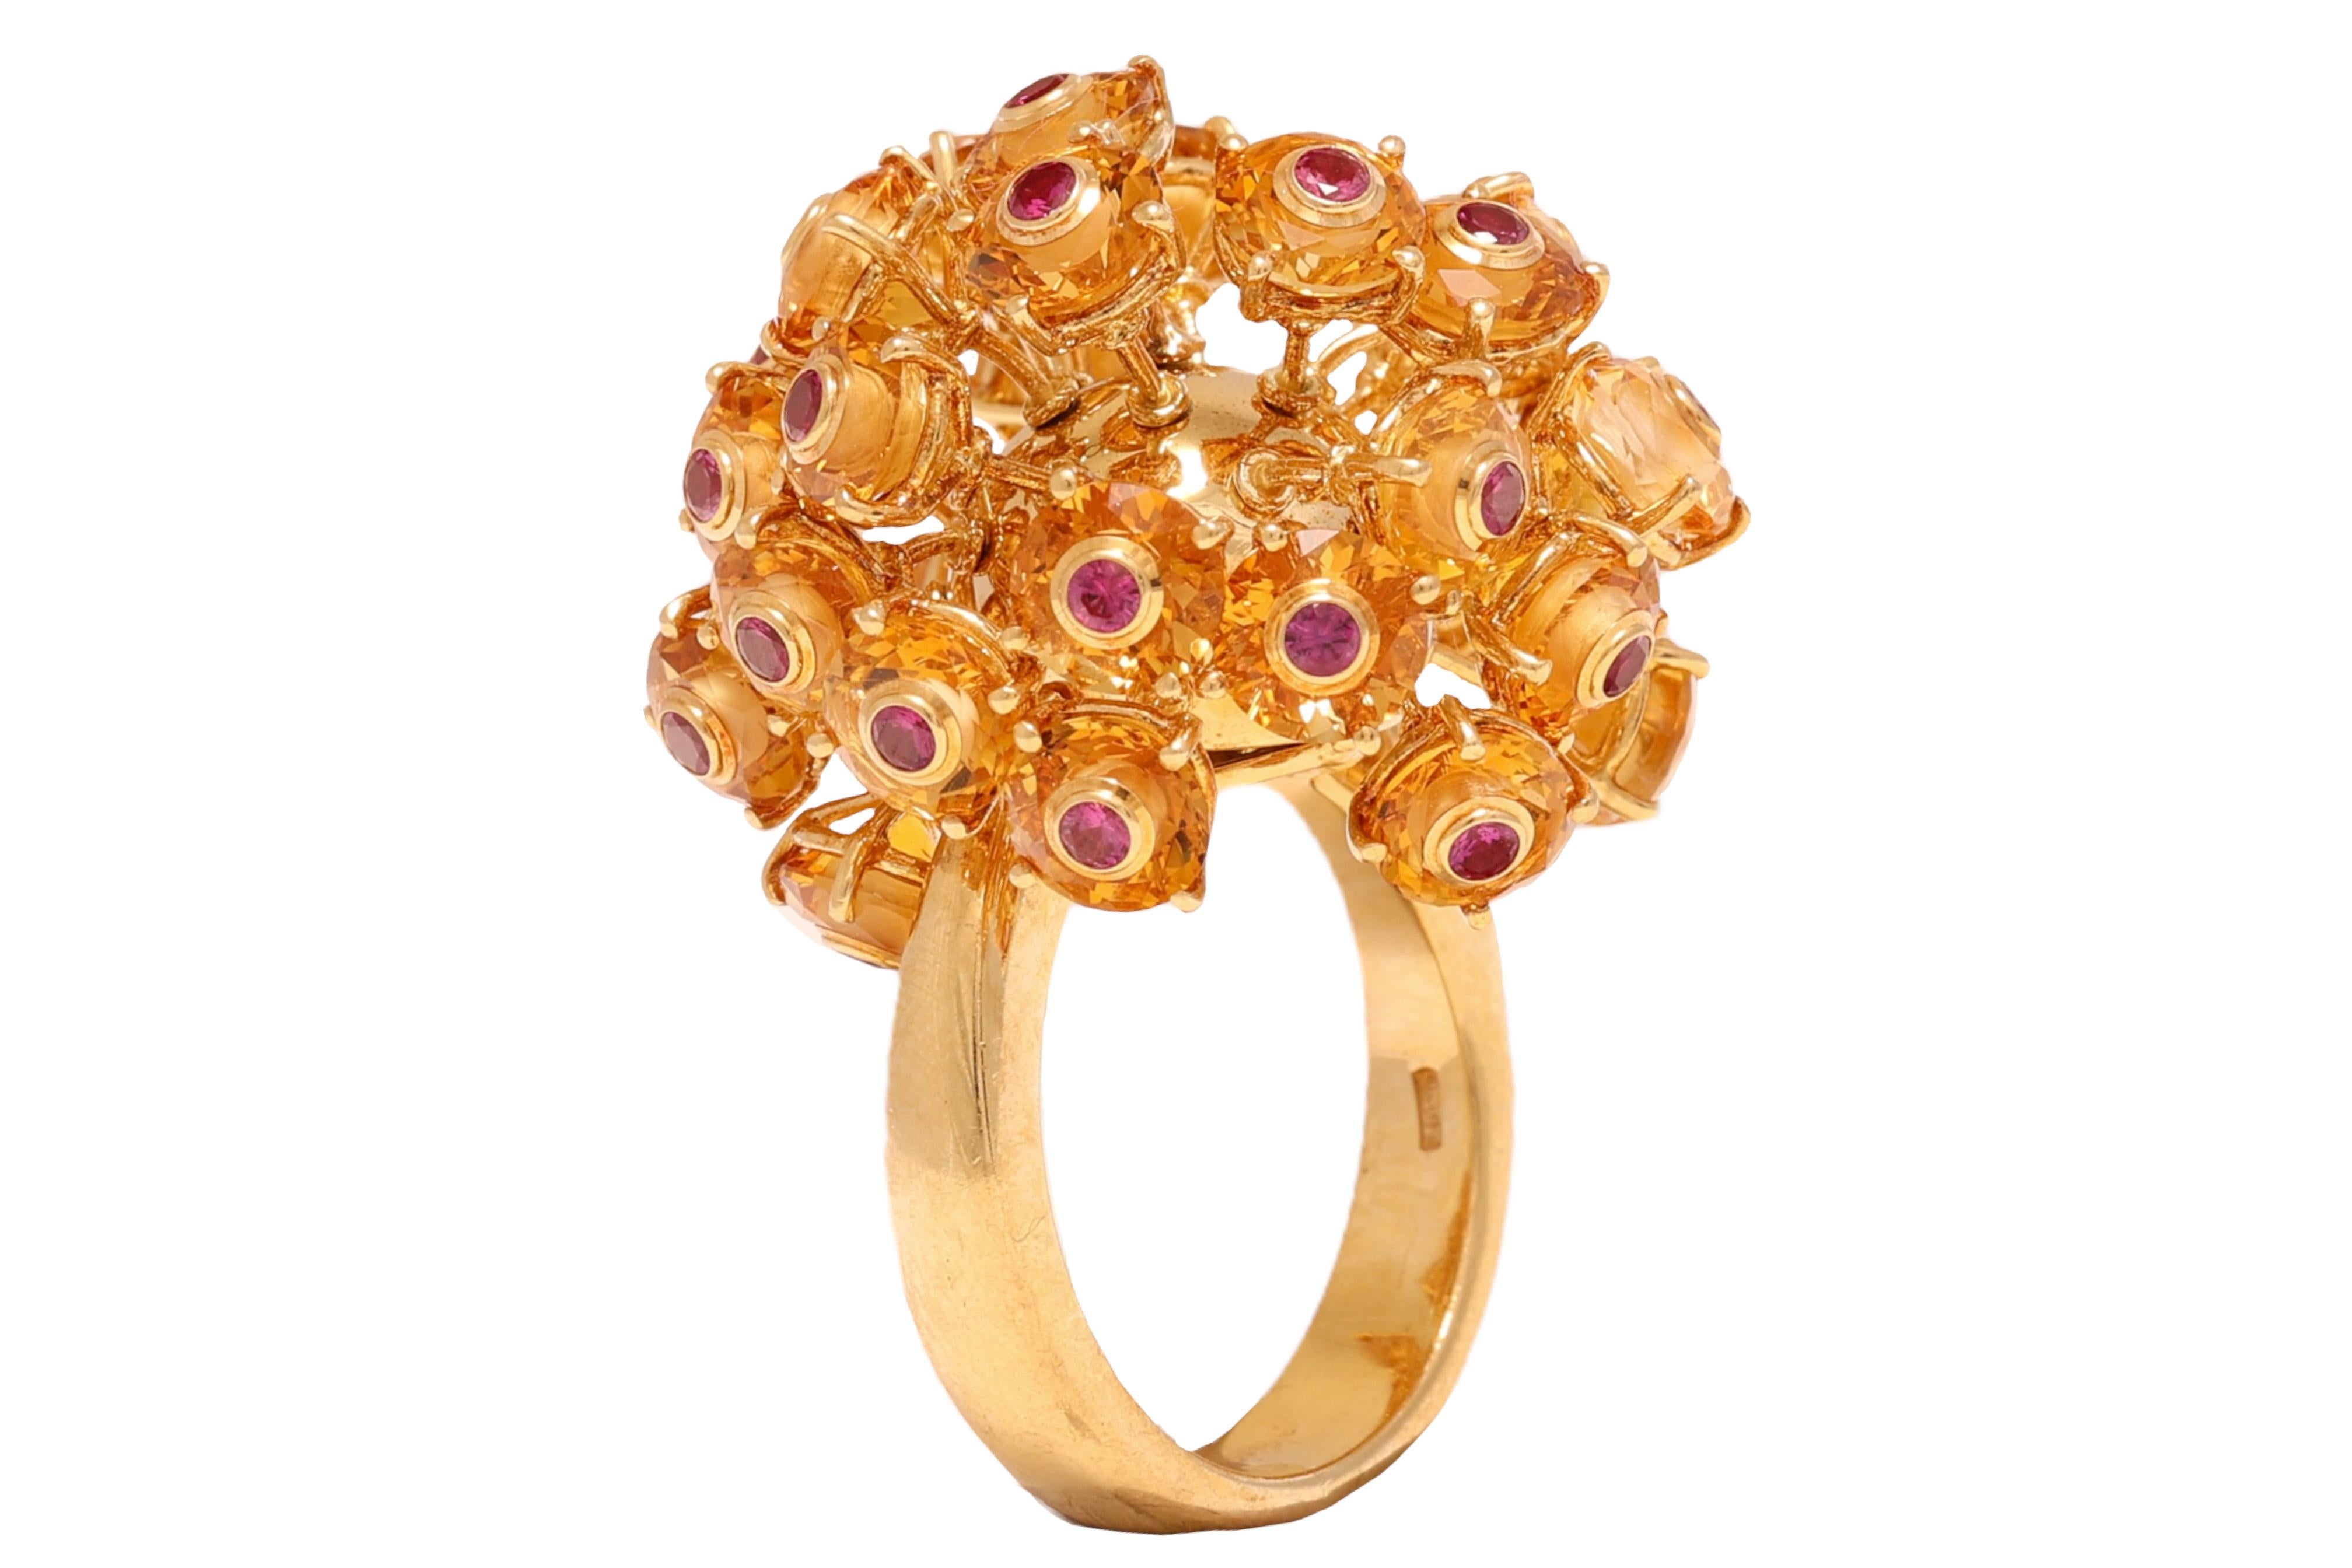  18 kt. Yellow Gold Ball of Moving 1.65 ct. Rubies and Citrine For Sale 2